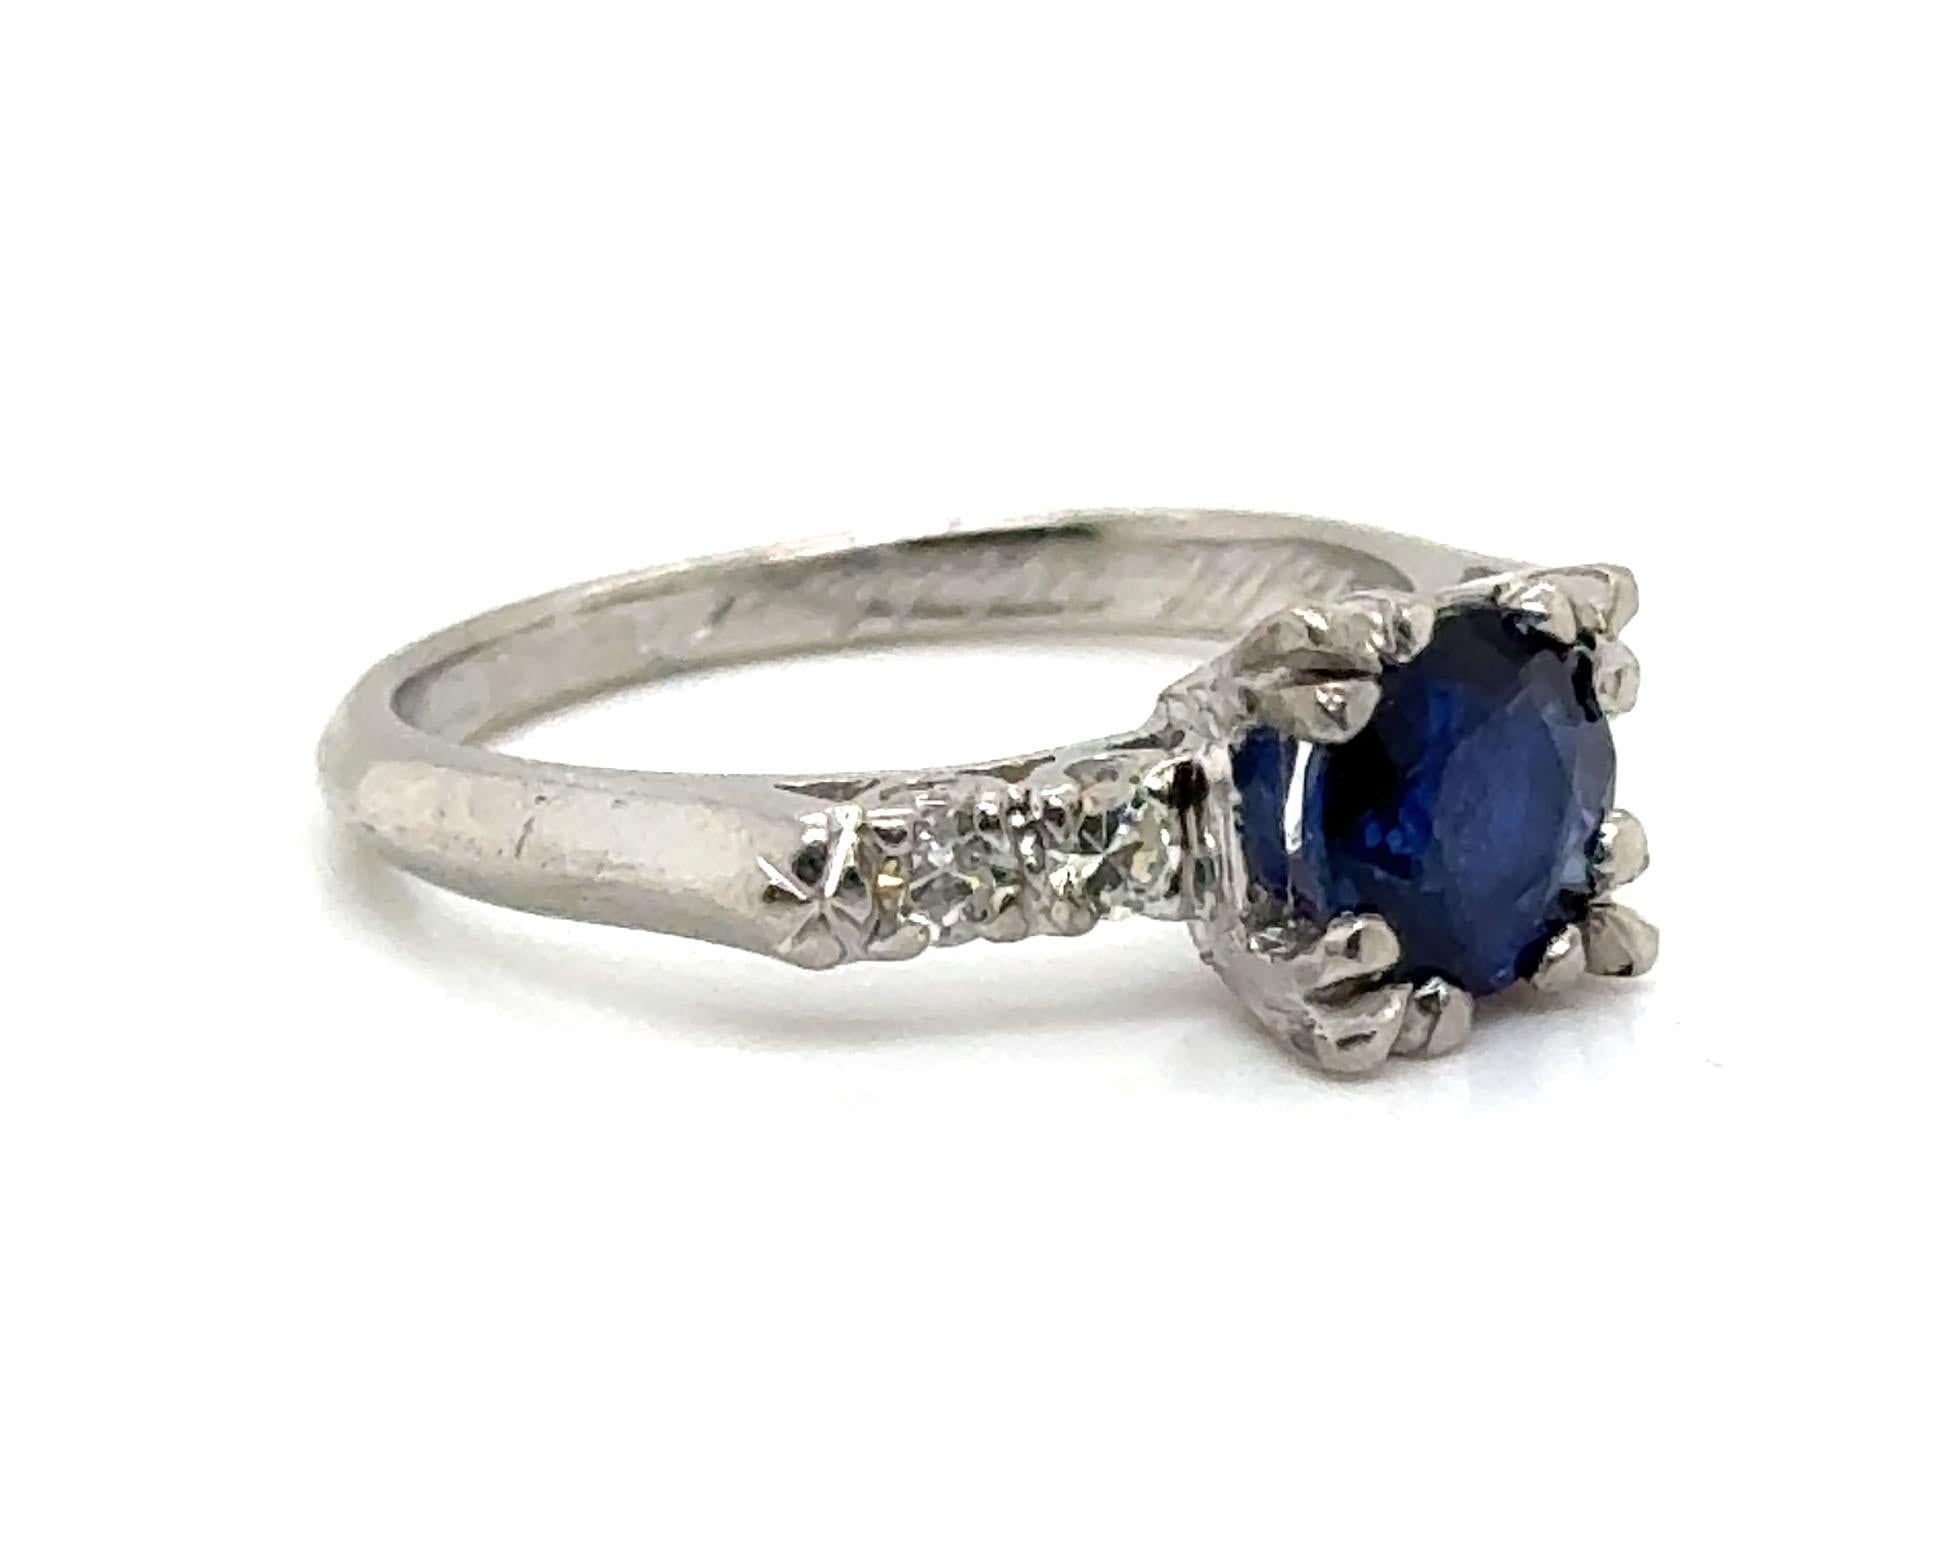 Genuine Original Art Deco Antique Dated 3-14-1940 Vintage Sapphire Diamond Ring 1.21ct Round Platinum


Showcasing a Captivating Centerpiece, this Piece Features a Genuine Natural Round Blue Sapphire with a Substantial Weight of 1.05